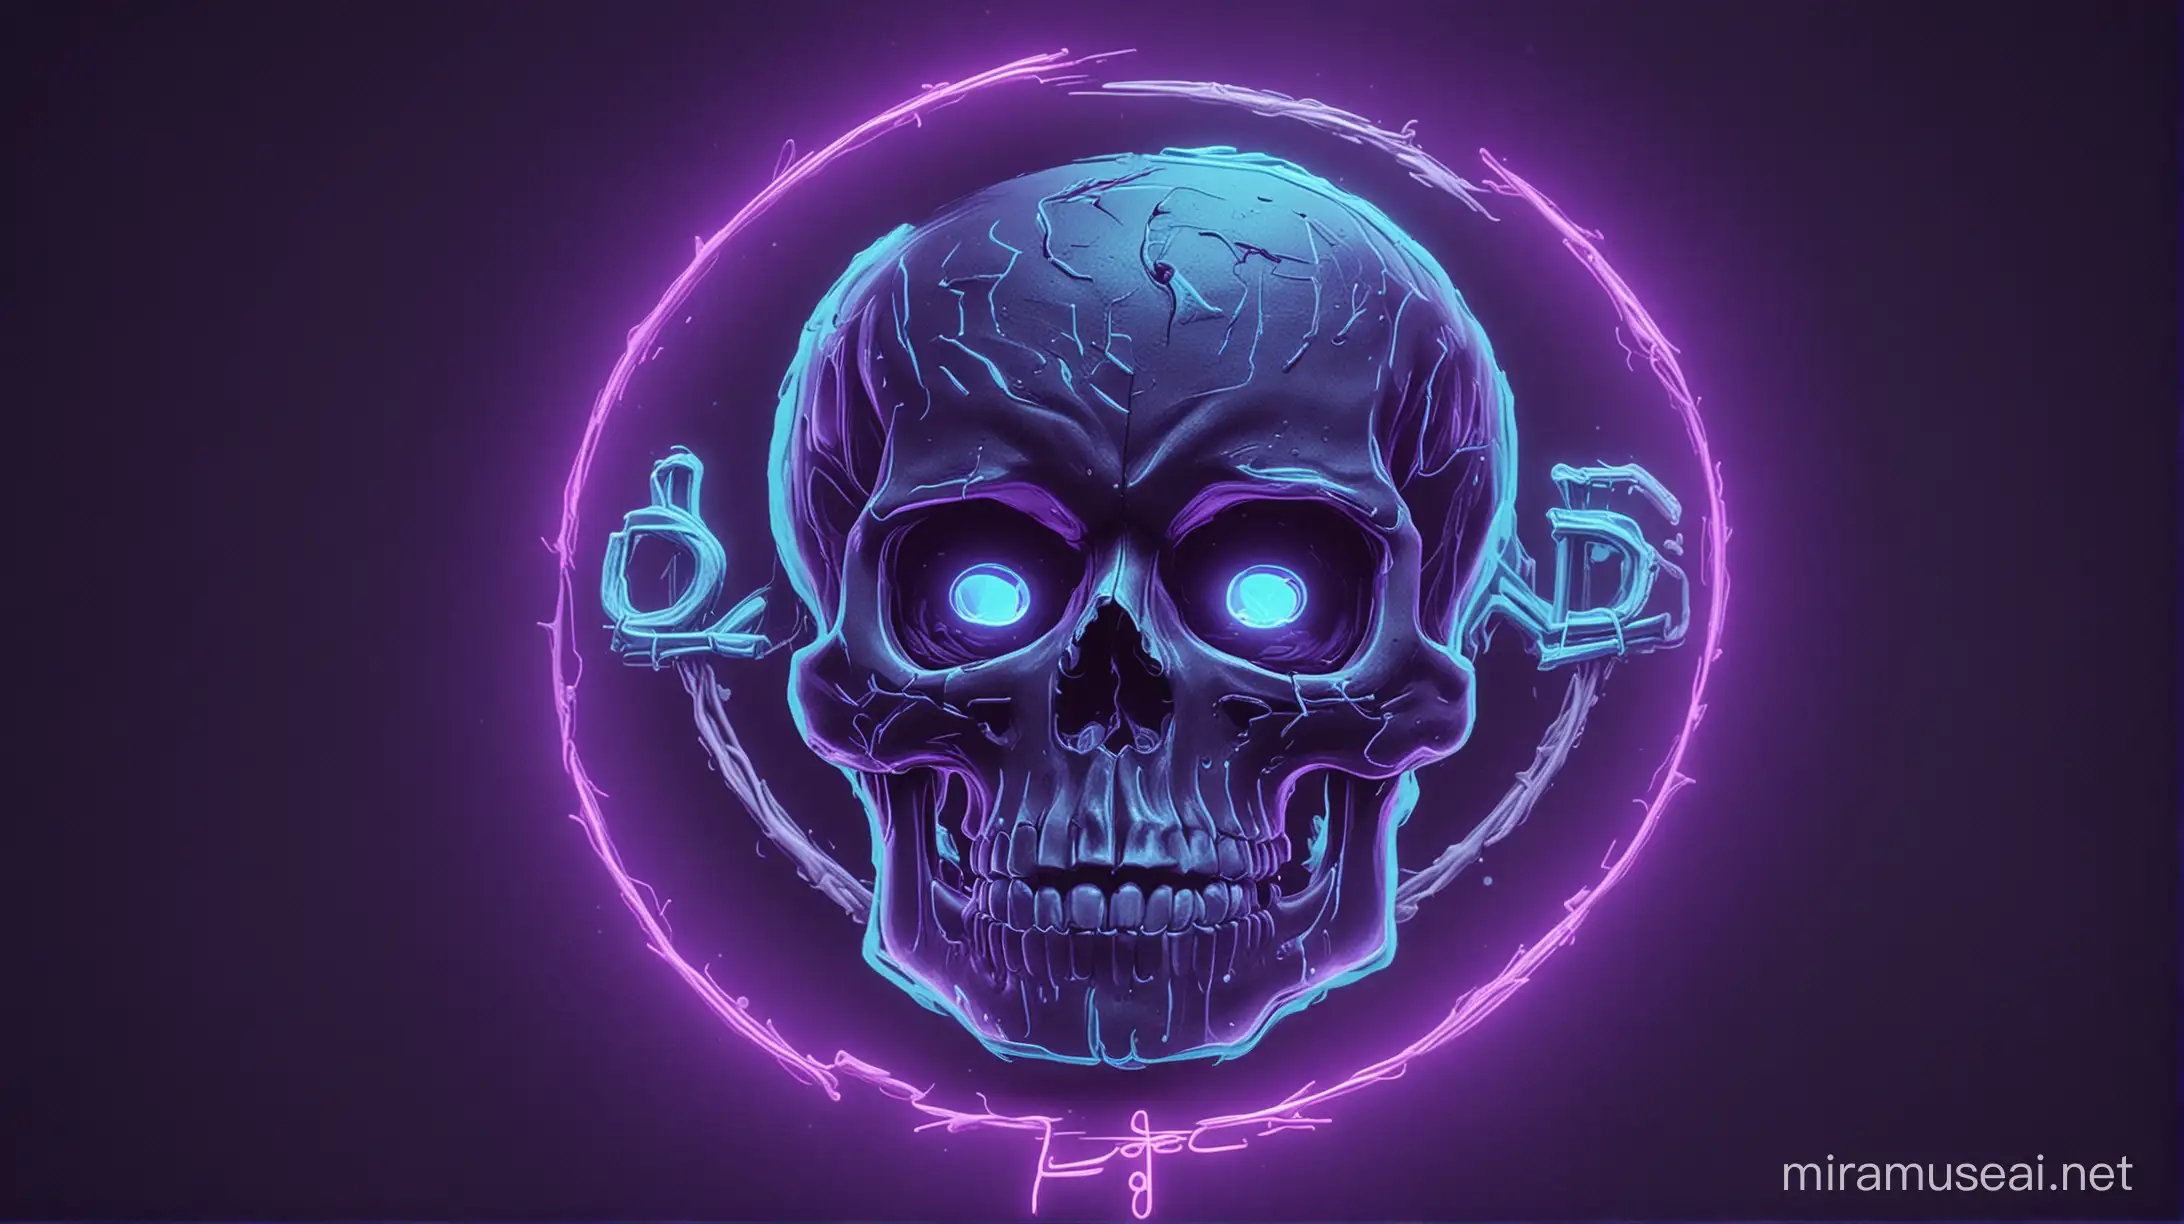 Please create a 4K ultra-realistic neon purple and neon blue logo of a skull for my online course called  "D.E.A.D.". With the logo please FOCUS on JUST using the initials of "D.E.A.D." Please include the writing "D.E.A.D."